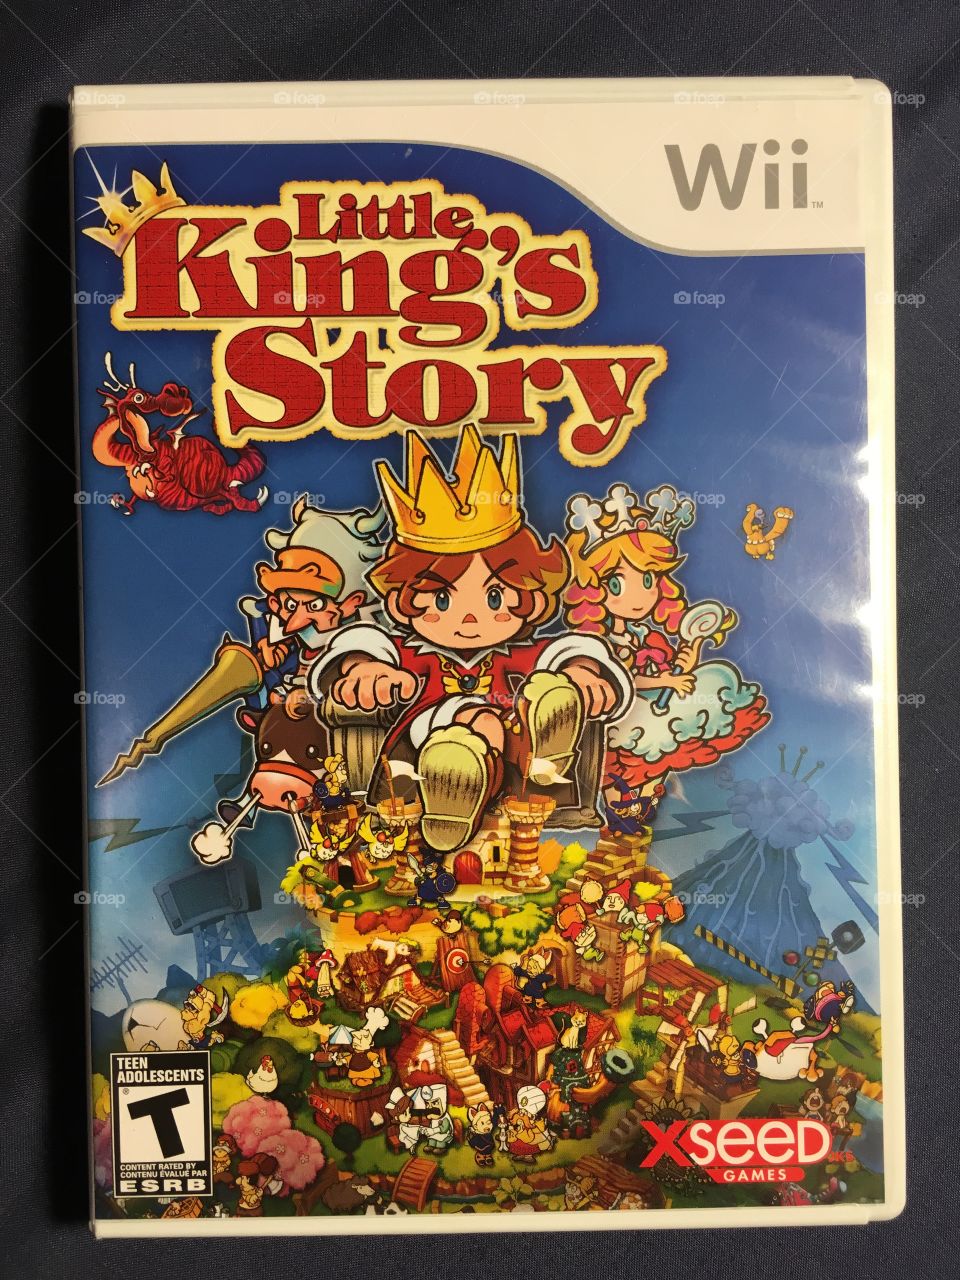 Little Kings Story video game for the Nintendo wii - released 2009